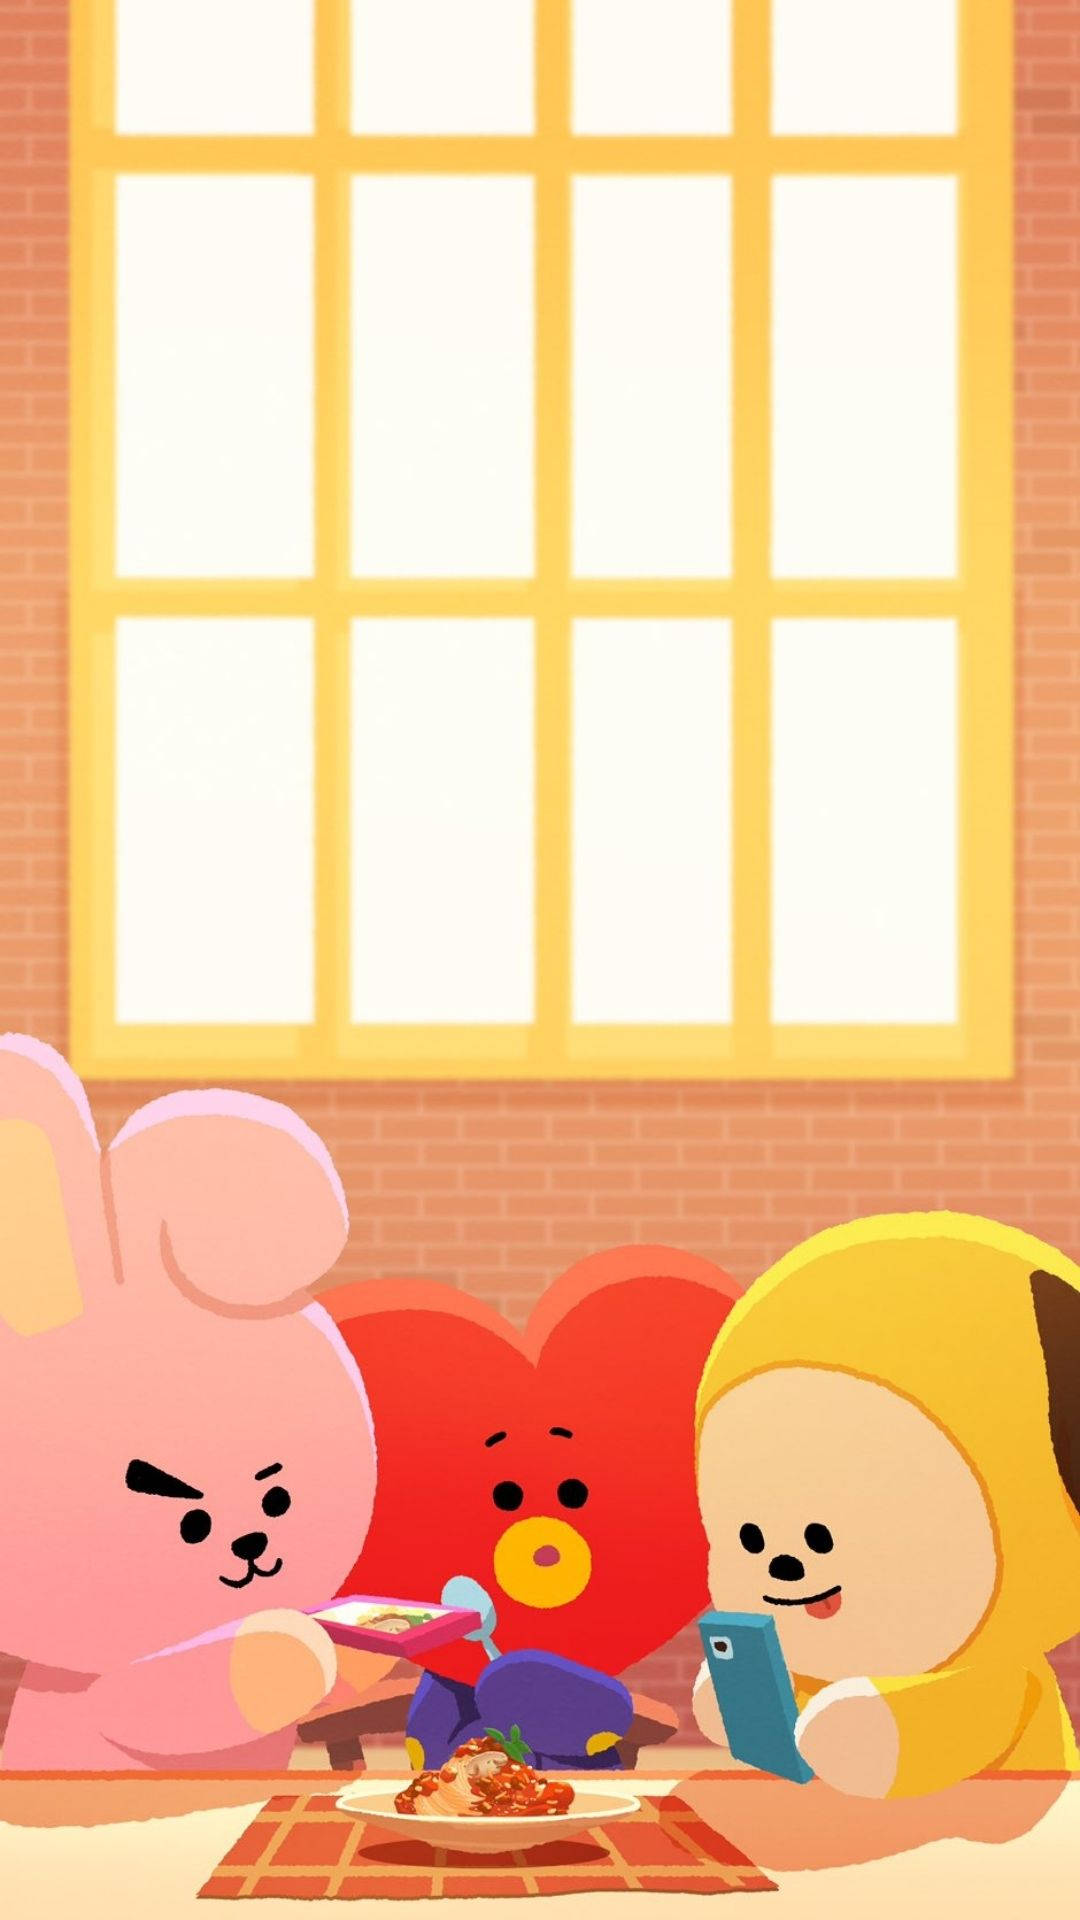 Bt21 Taking Pictures Of Food